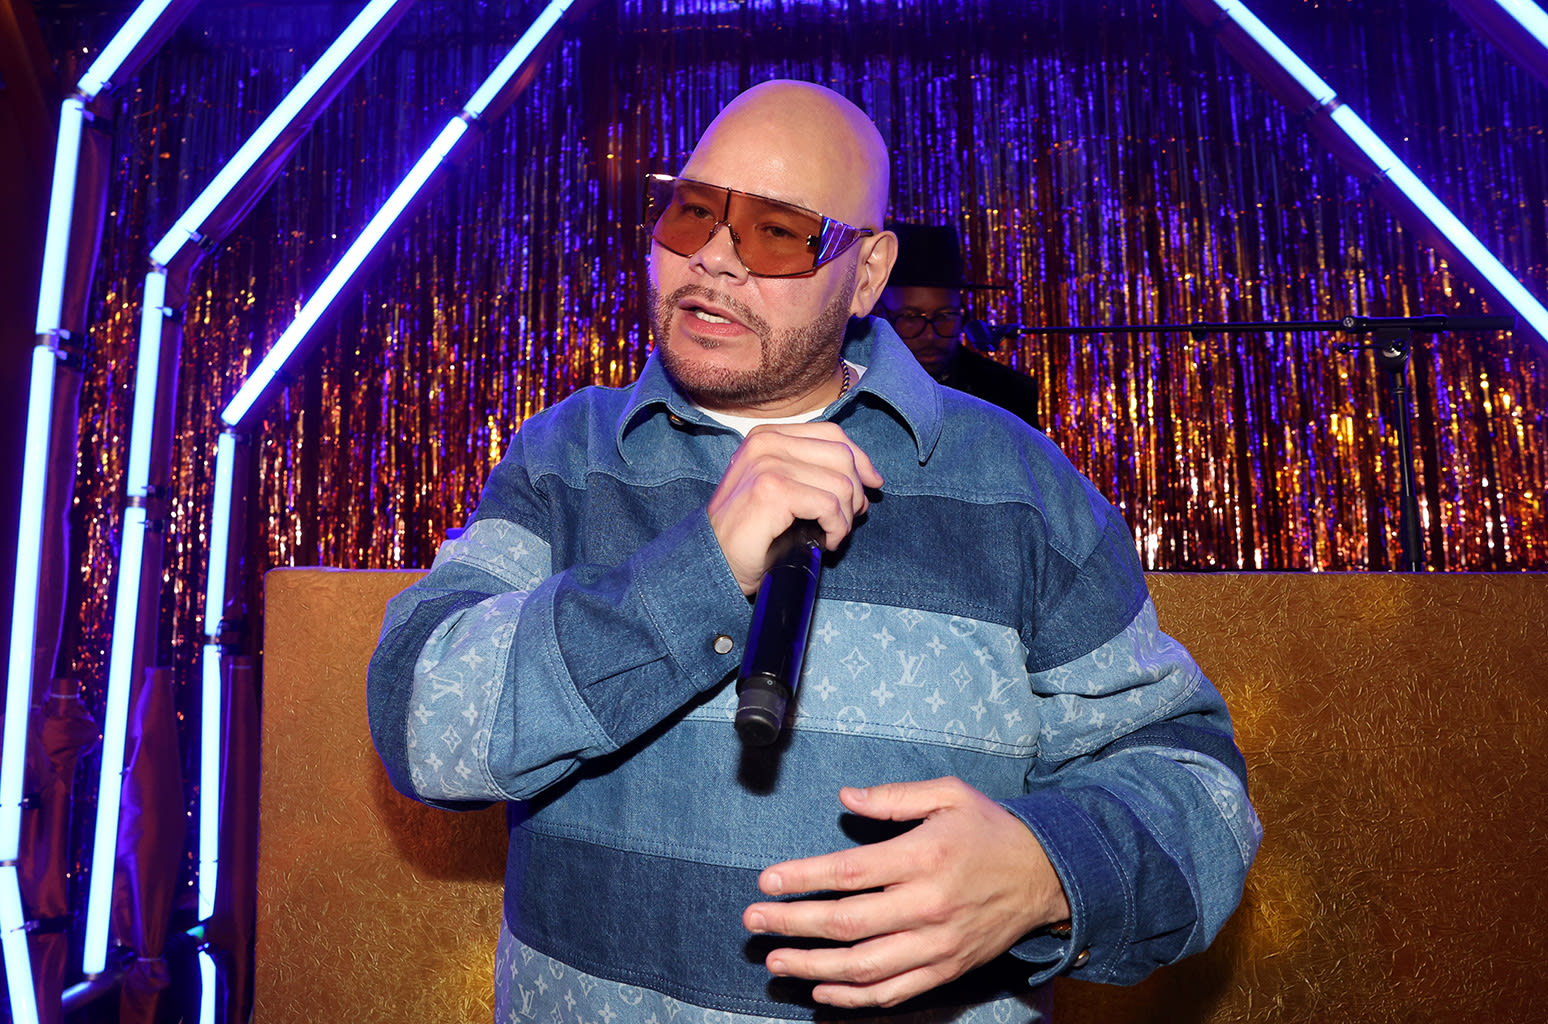 Fat Joe Says He’s Got a New Album Coming, Drops ‘Outta Control’ Featuring Remy Ma